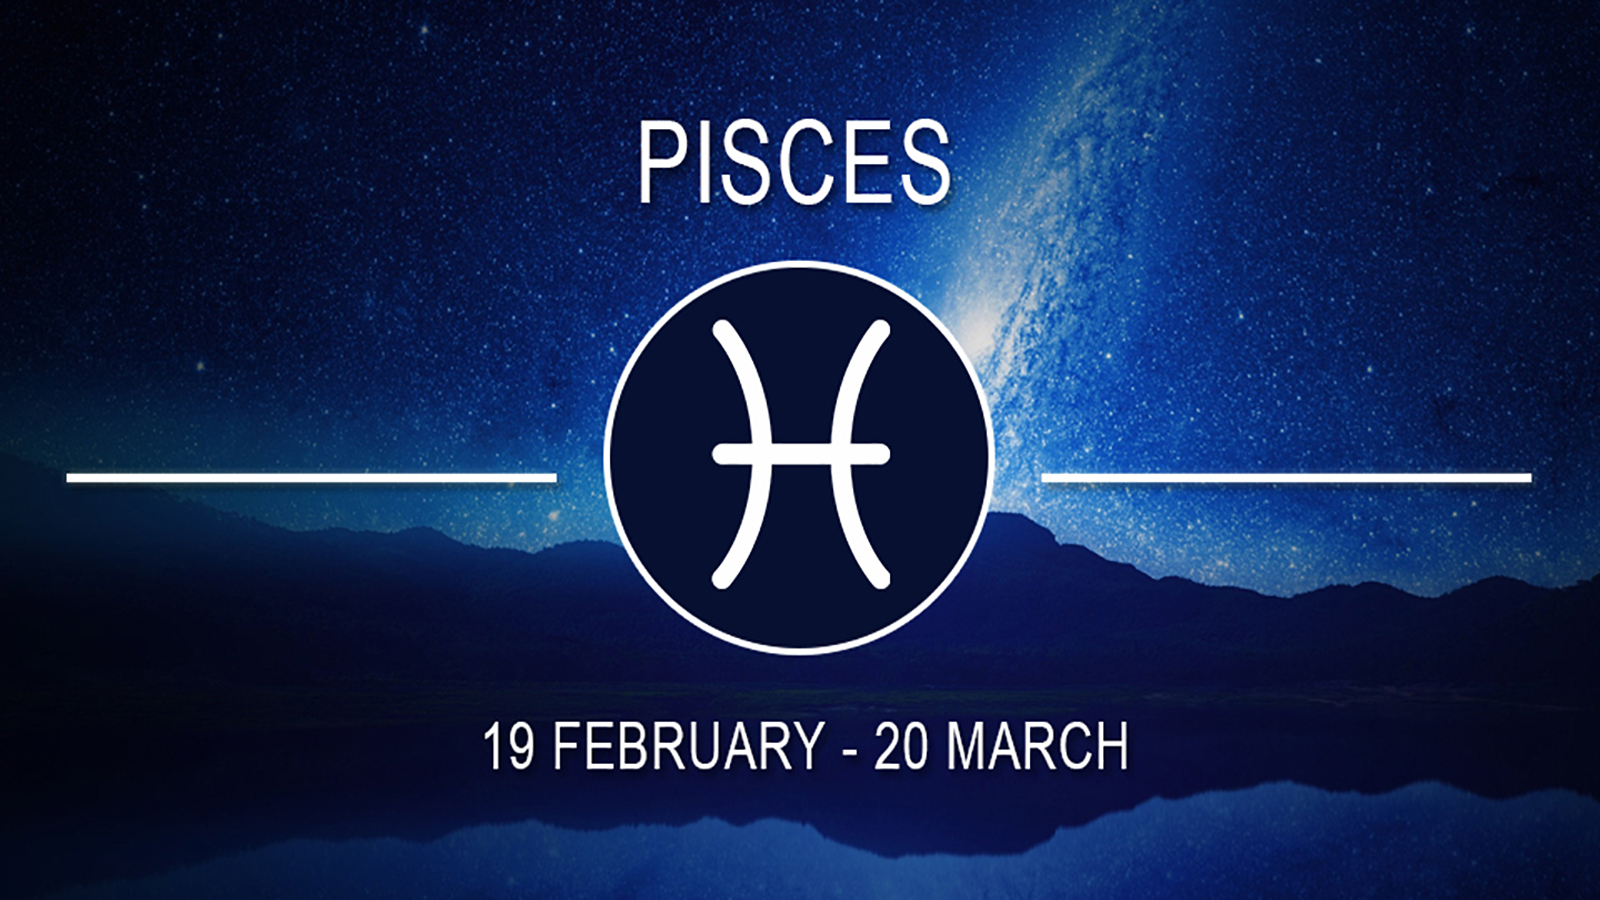 12 Pisces (February 19 - March 20)